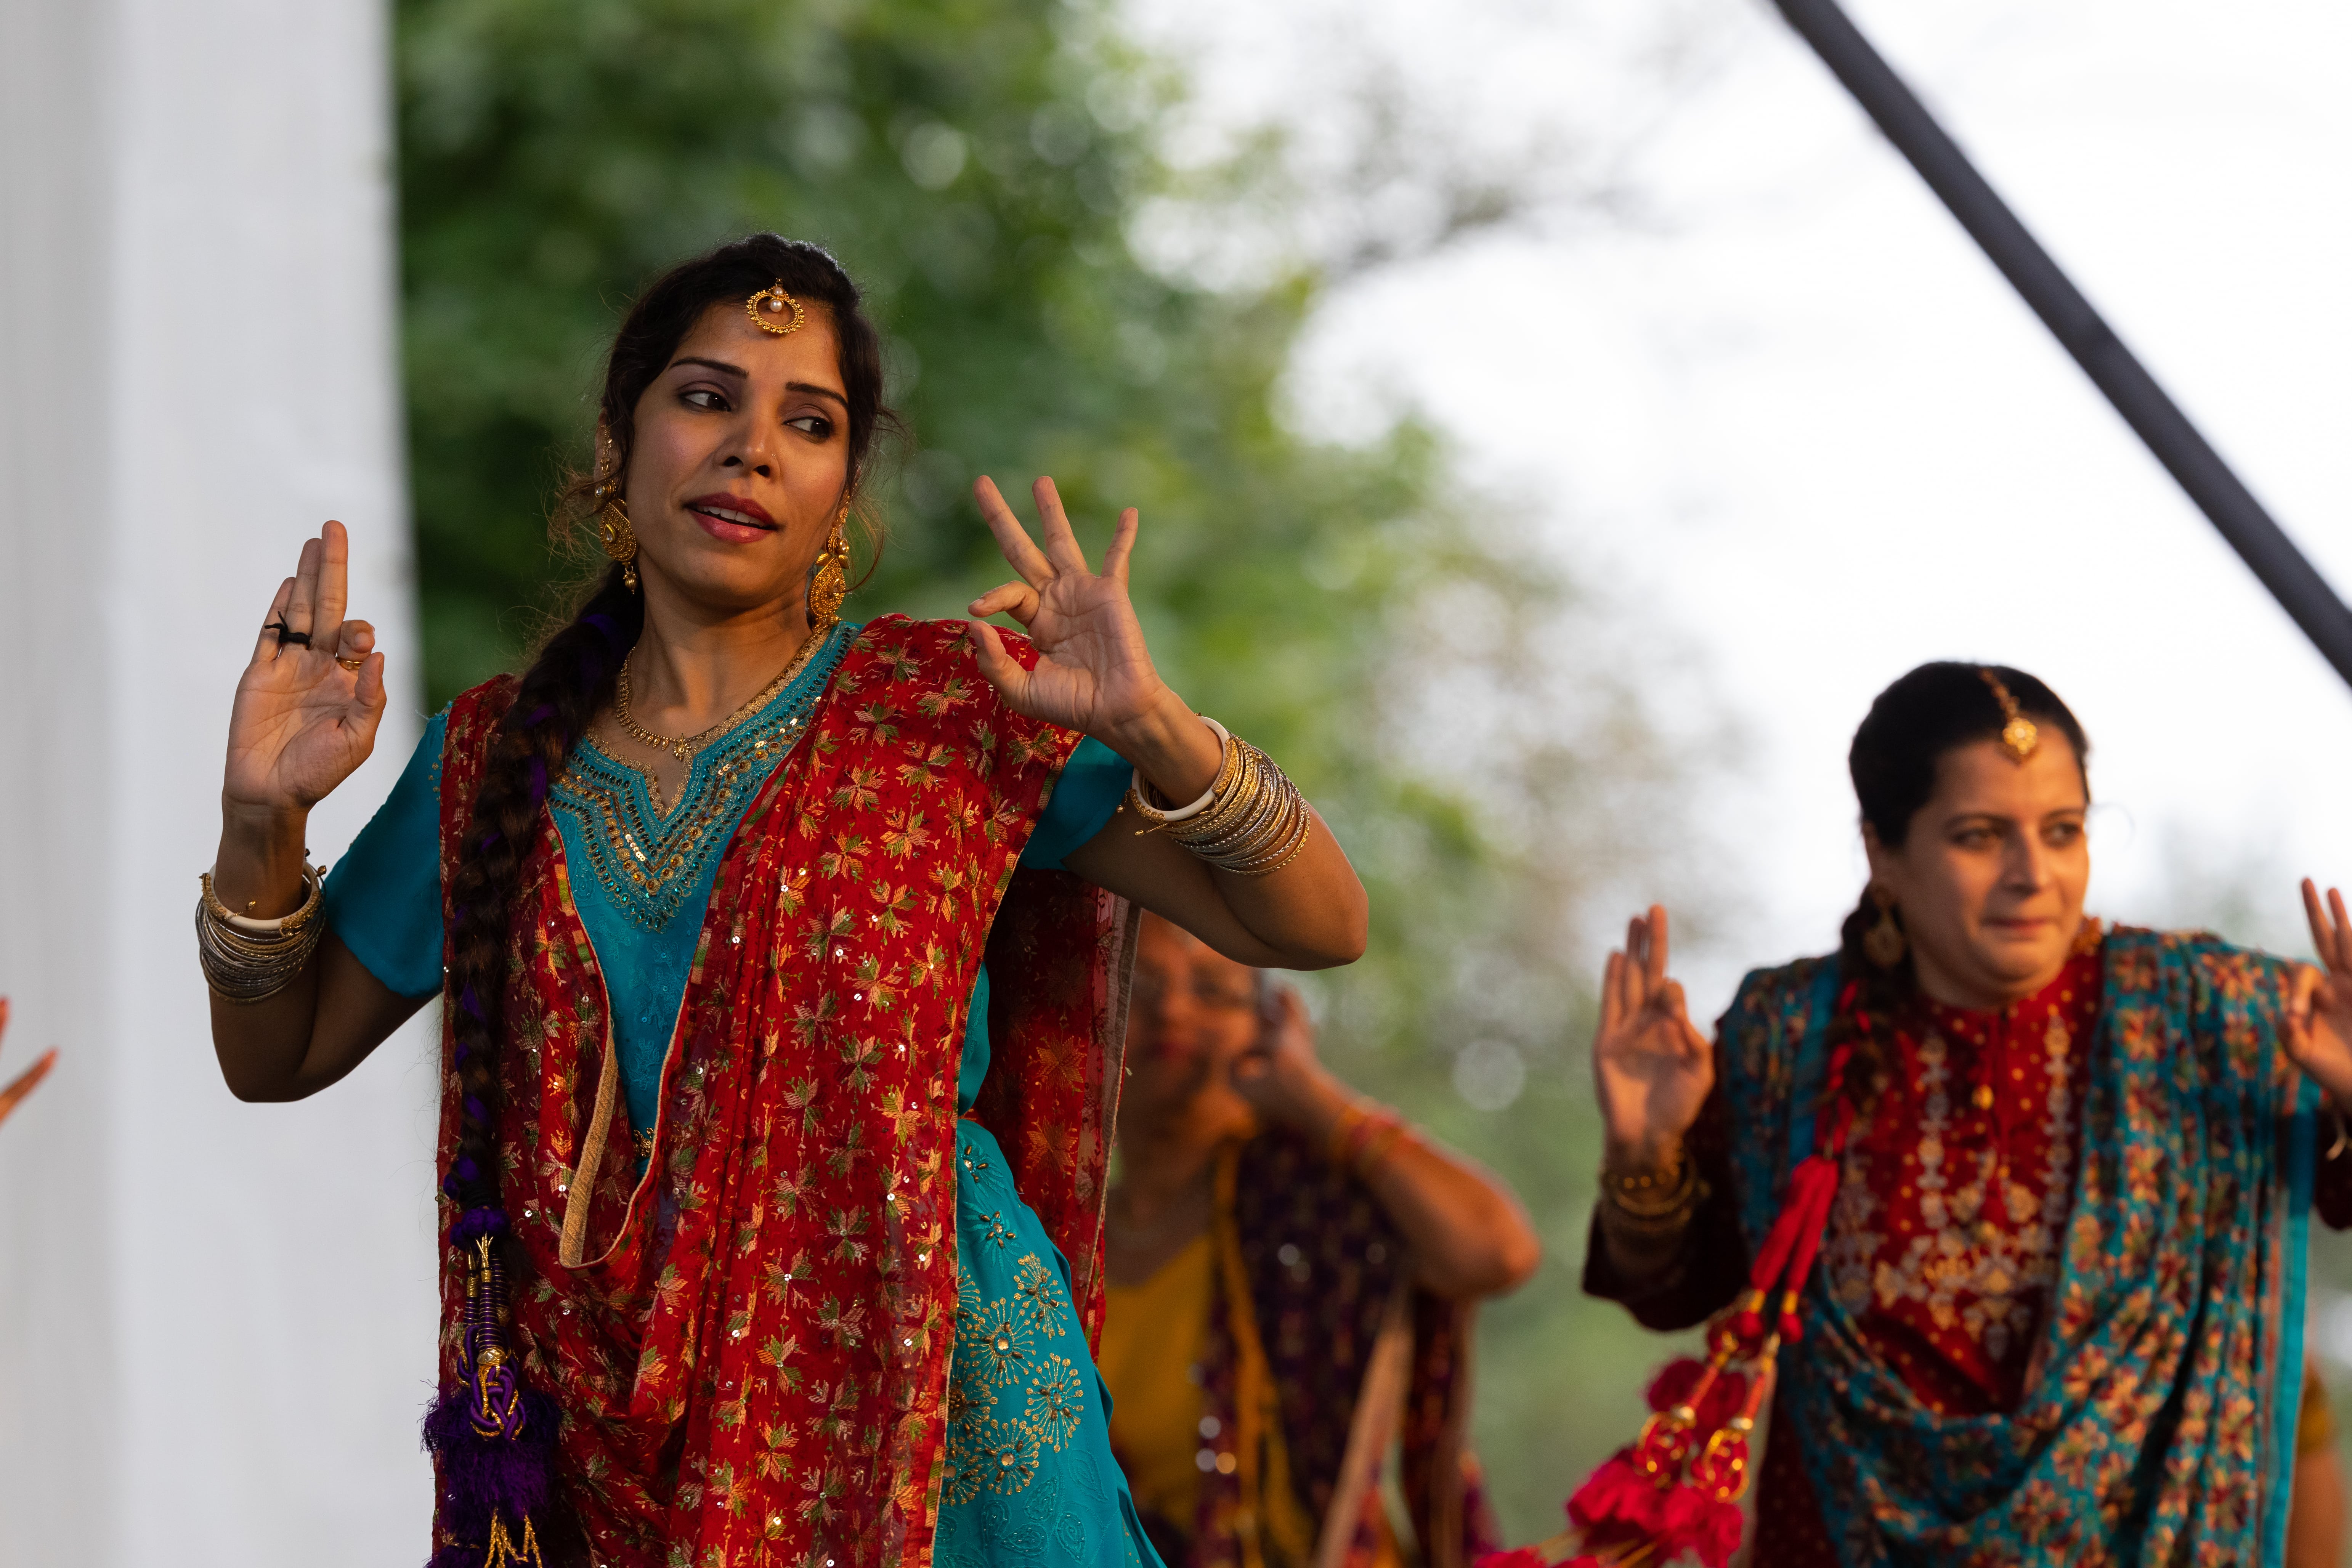 Bhangra dancing, a cultural folk dance from Punjab, India, can be an excellent aerobic exercise to motivate South Asian girls and boys to be physically active. Photo credit: iStock.com/Roberto Galan